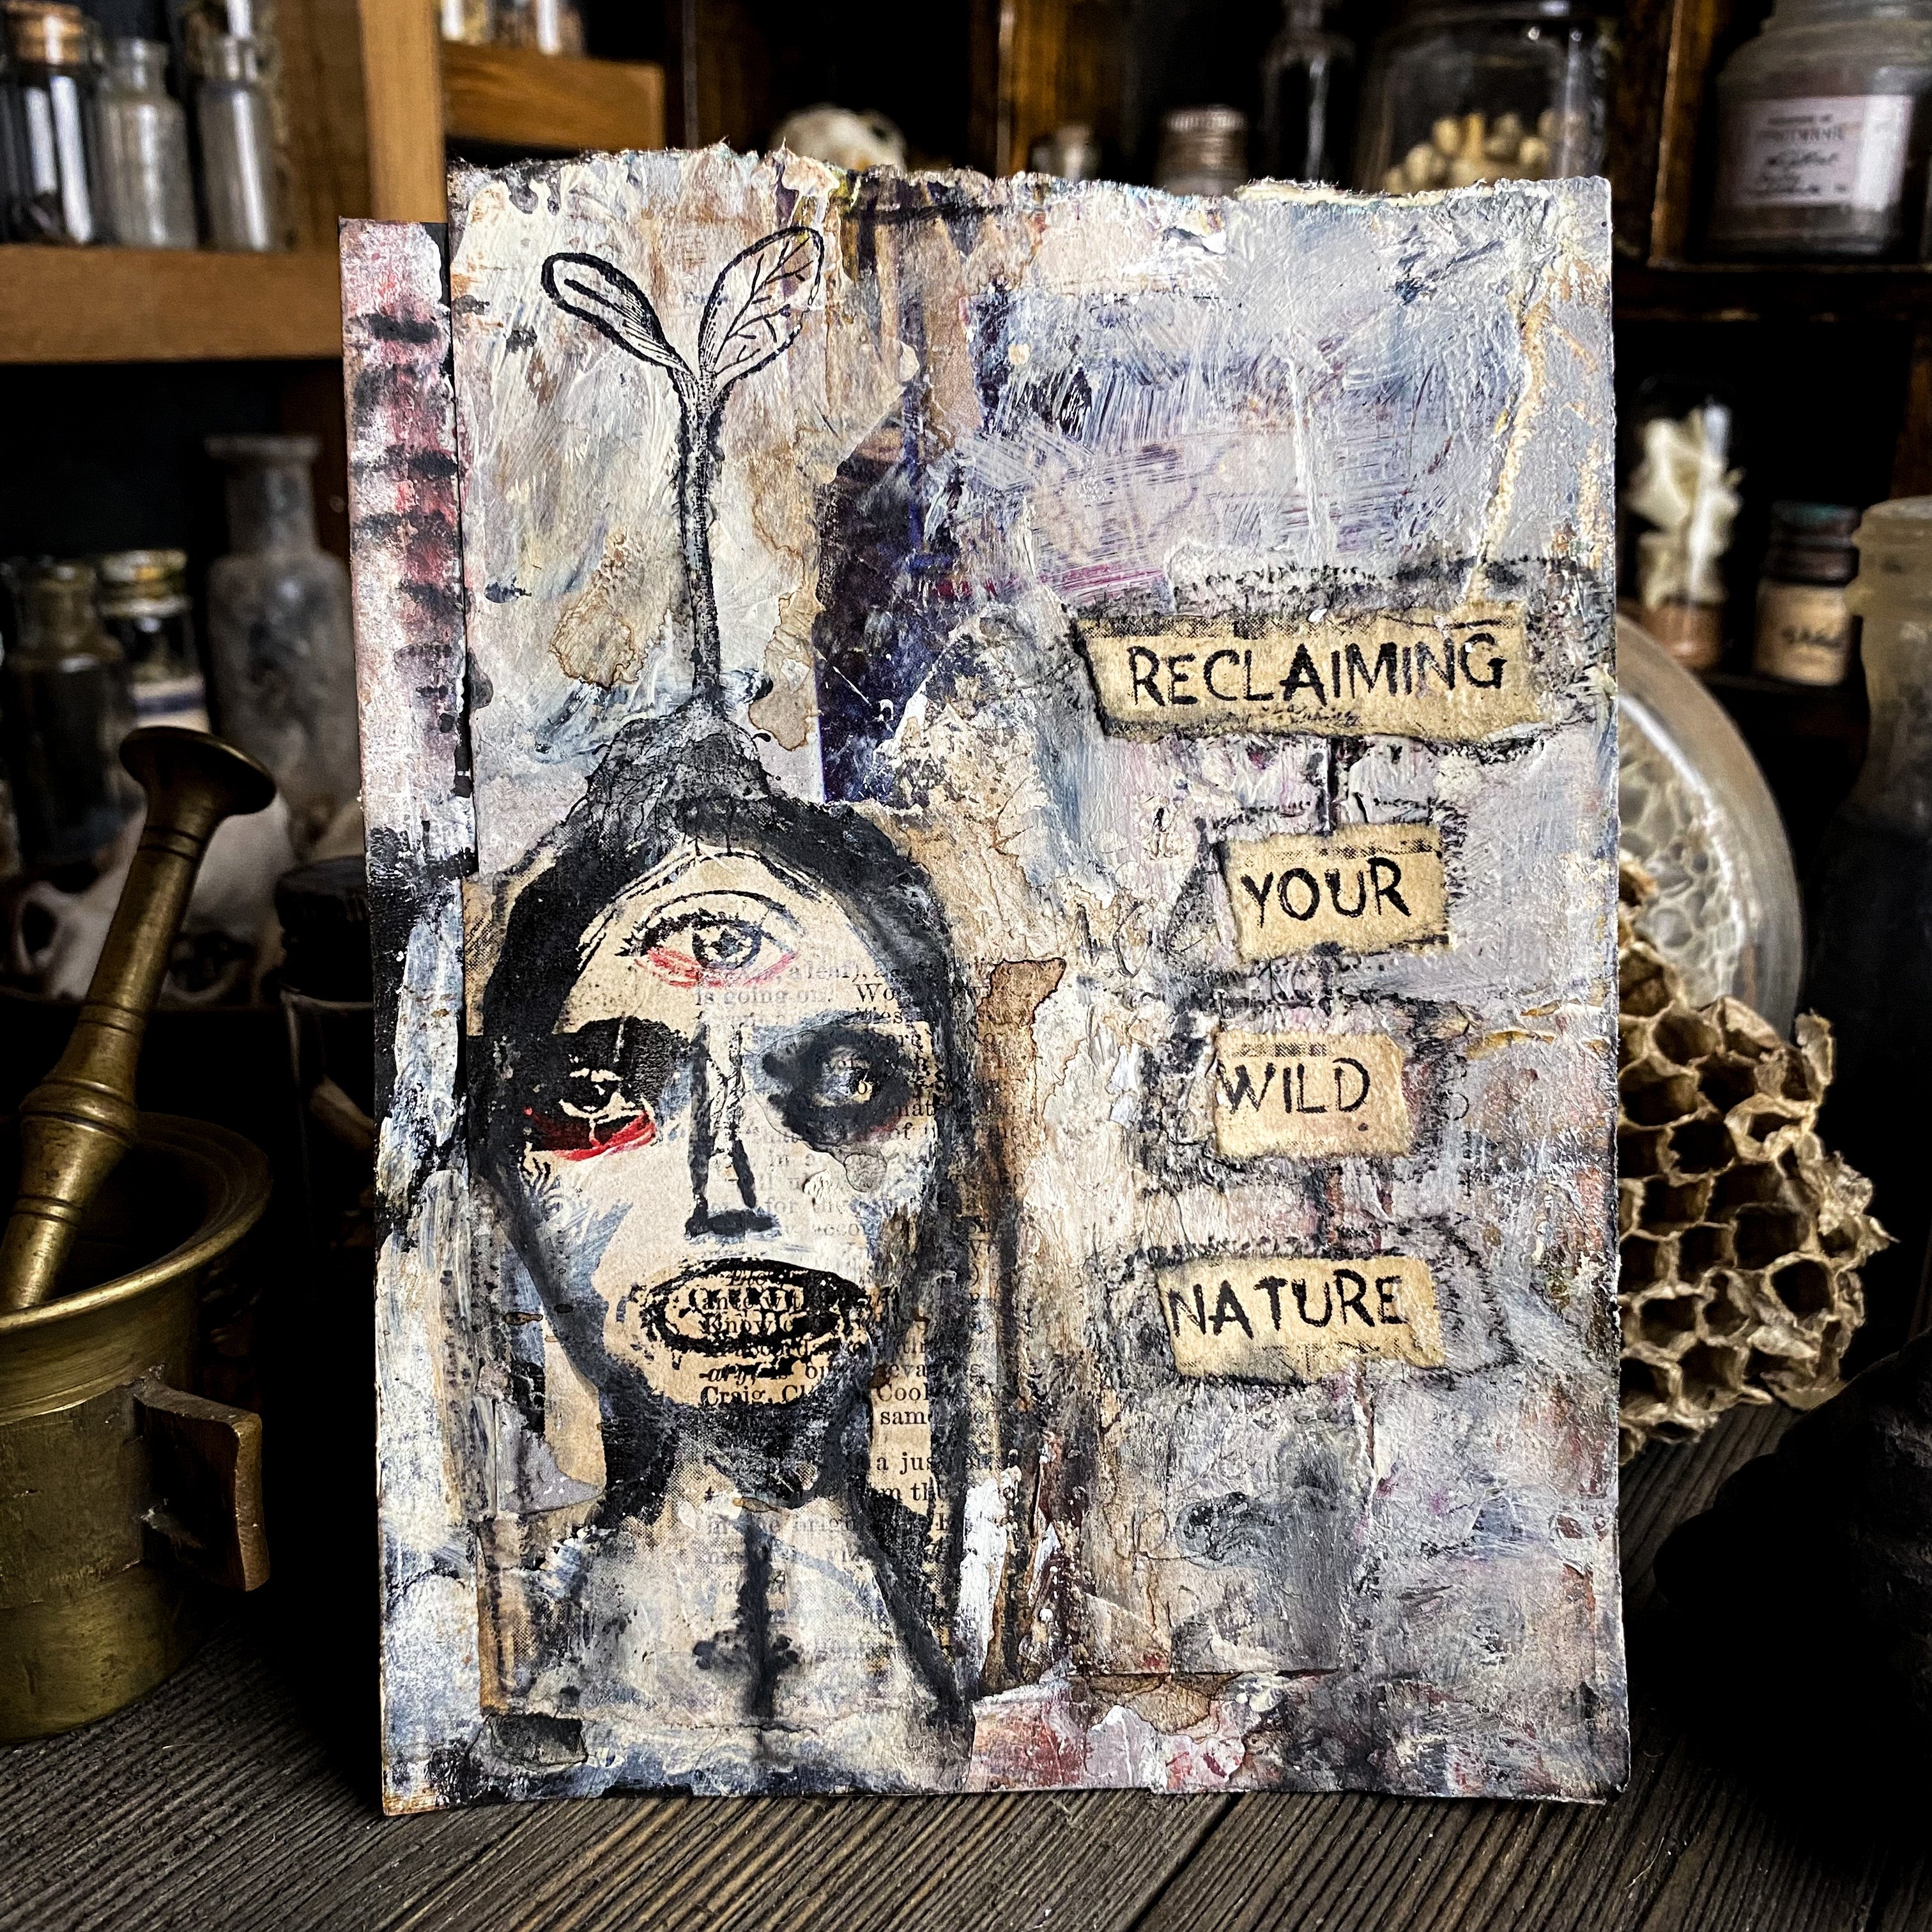 Reclaiming Your Wild Nature - Original Mixed Media Collage